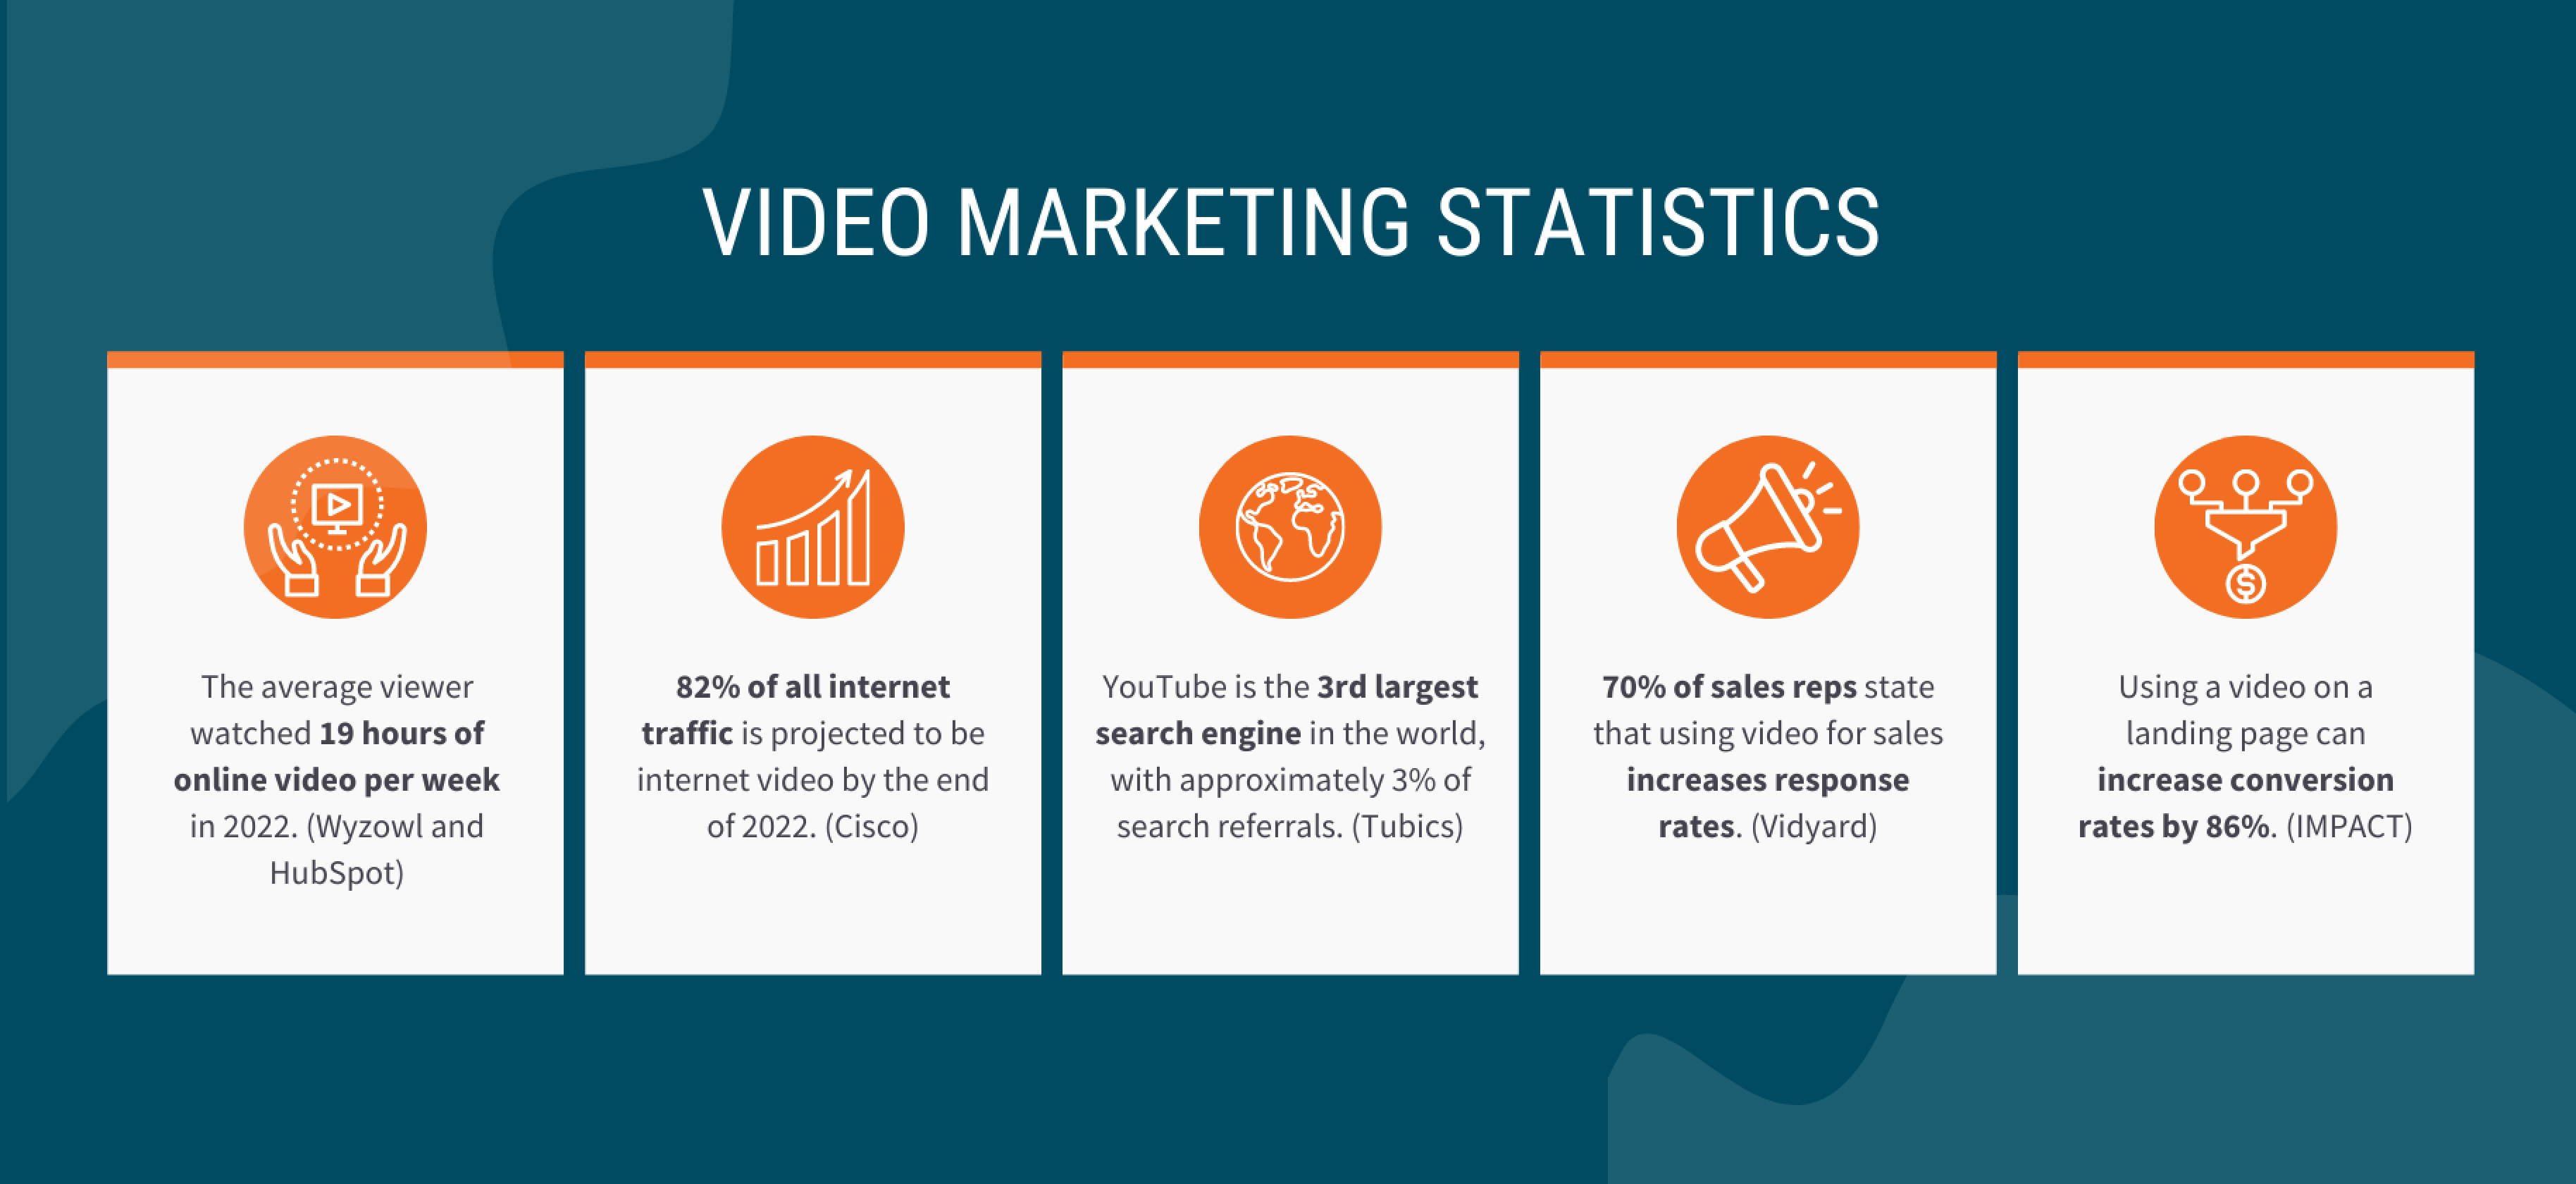 Video Marketing Stats - Infographic